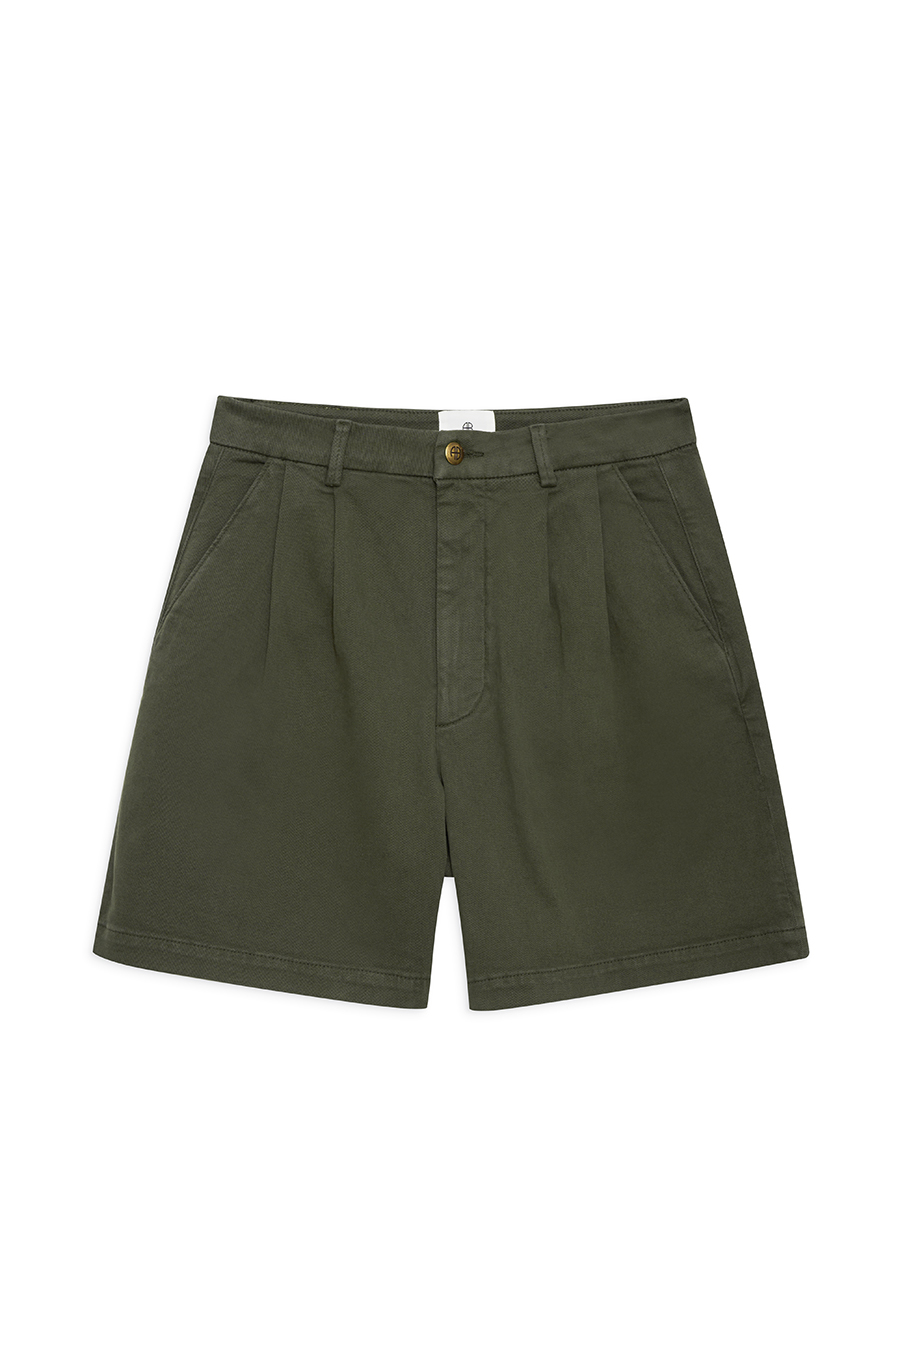 Anine Bing, Carrie short army green